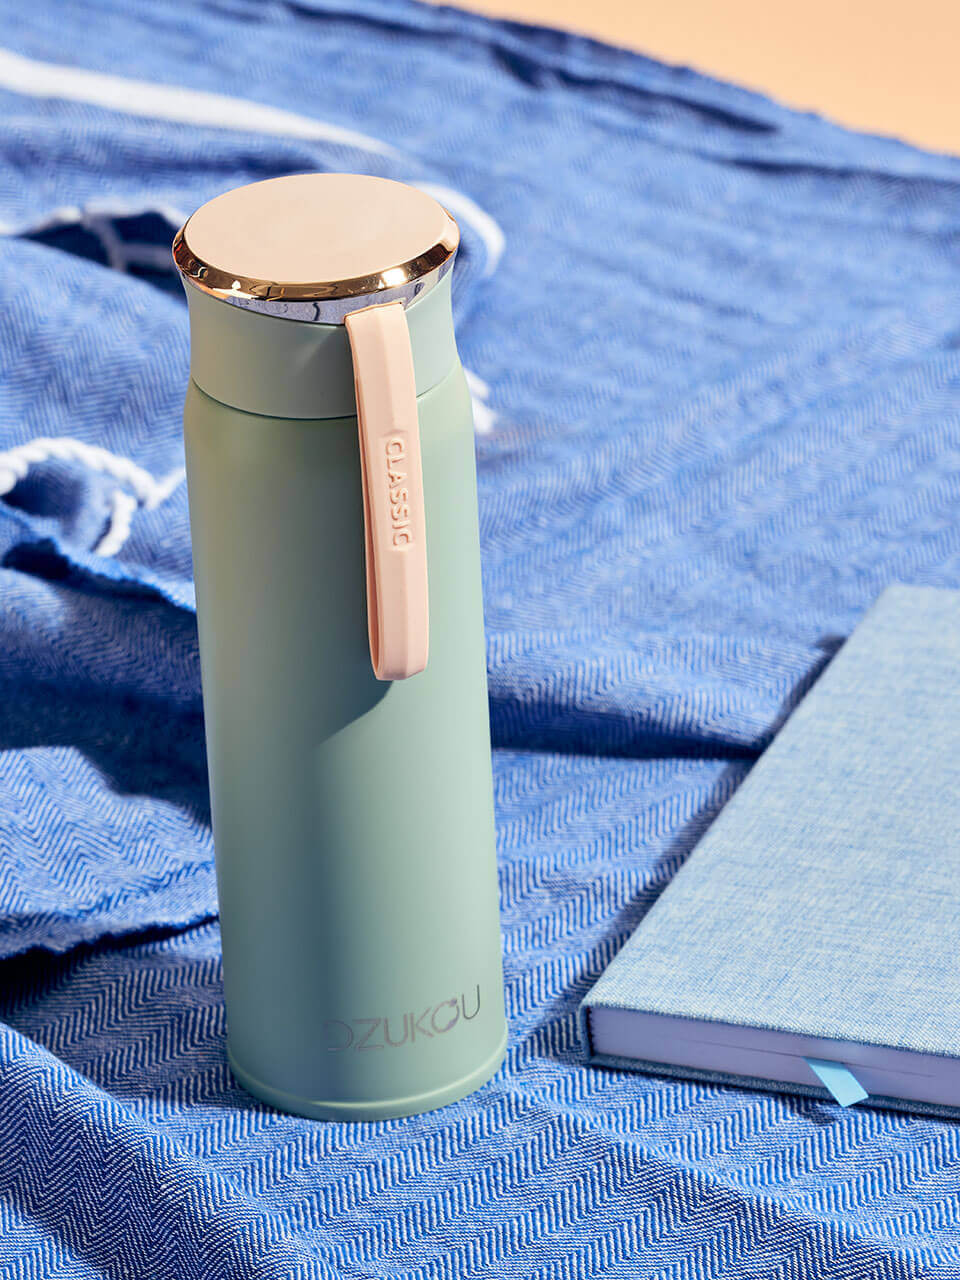 Blue Bottle with a bamboo lid